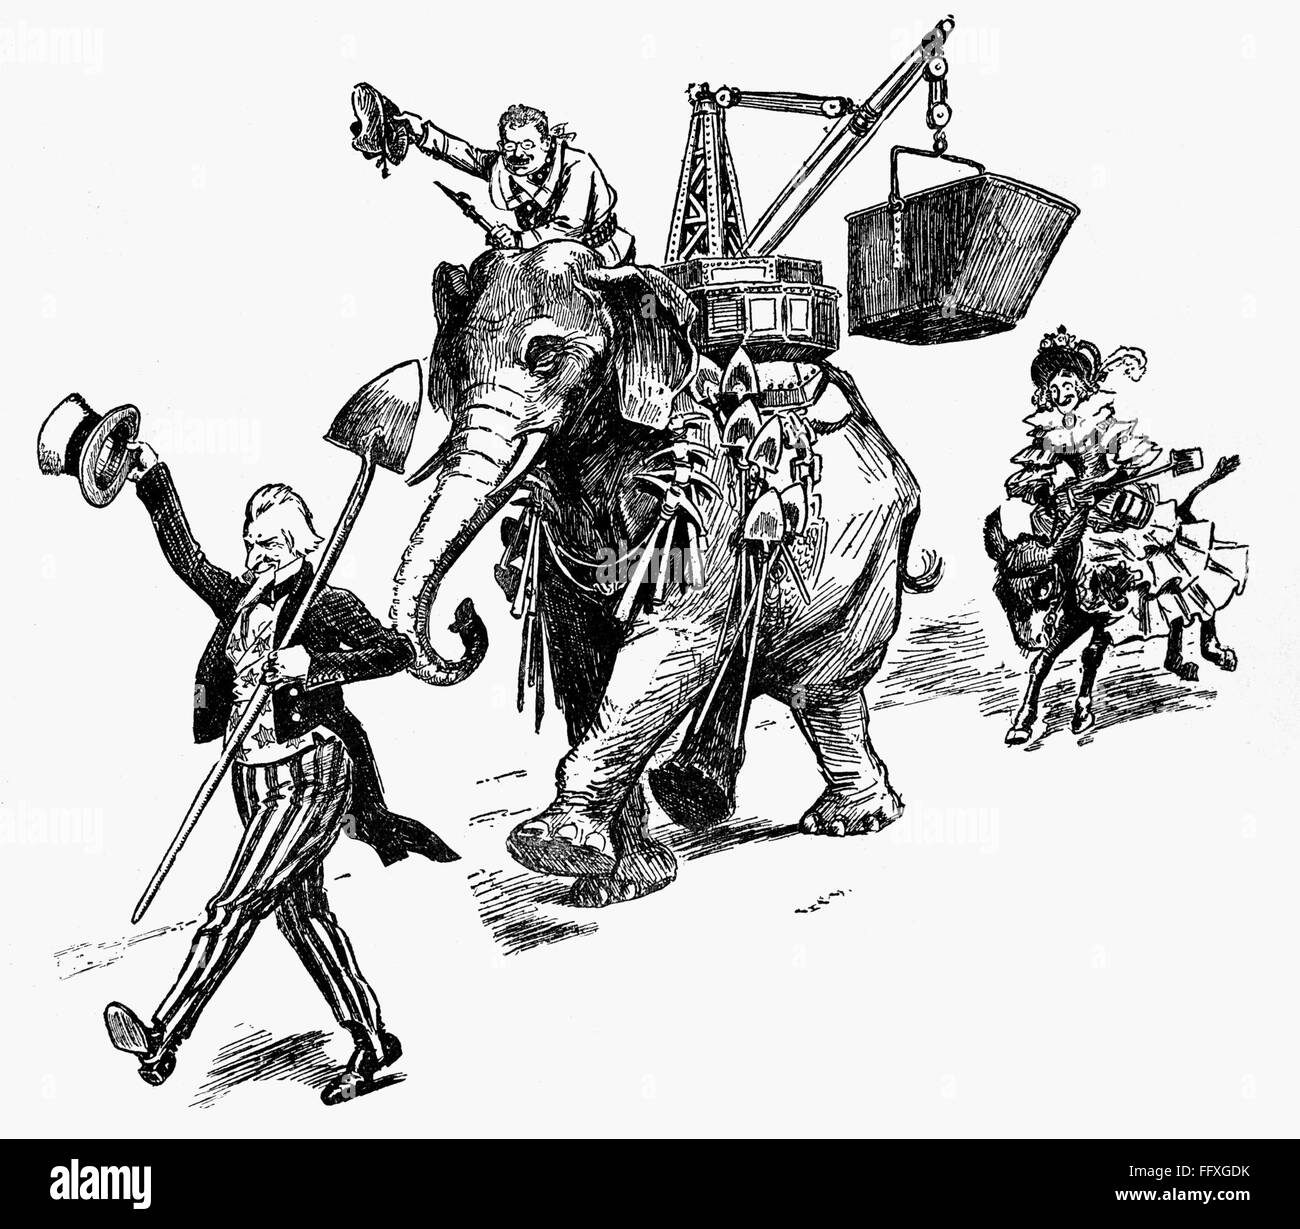 PANAMA CANAL CARTOON, 1903. /n'On to Panama!' American cartoon, 1903, showing Uncle Sam leading a country united behind President Theodore Roosevelt to begin construction on the Panama Canal. Stock Photo